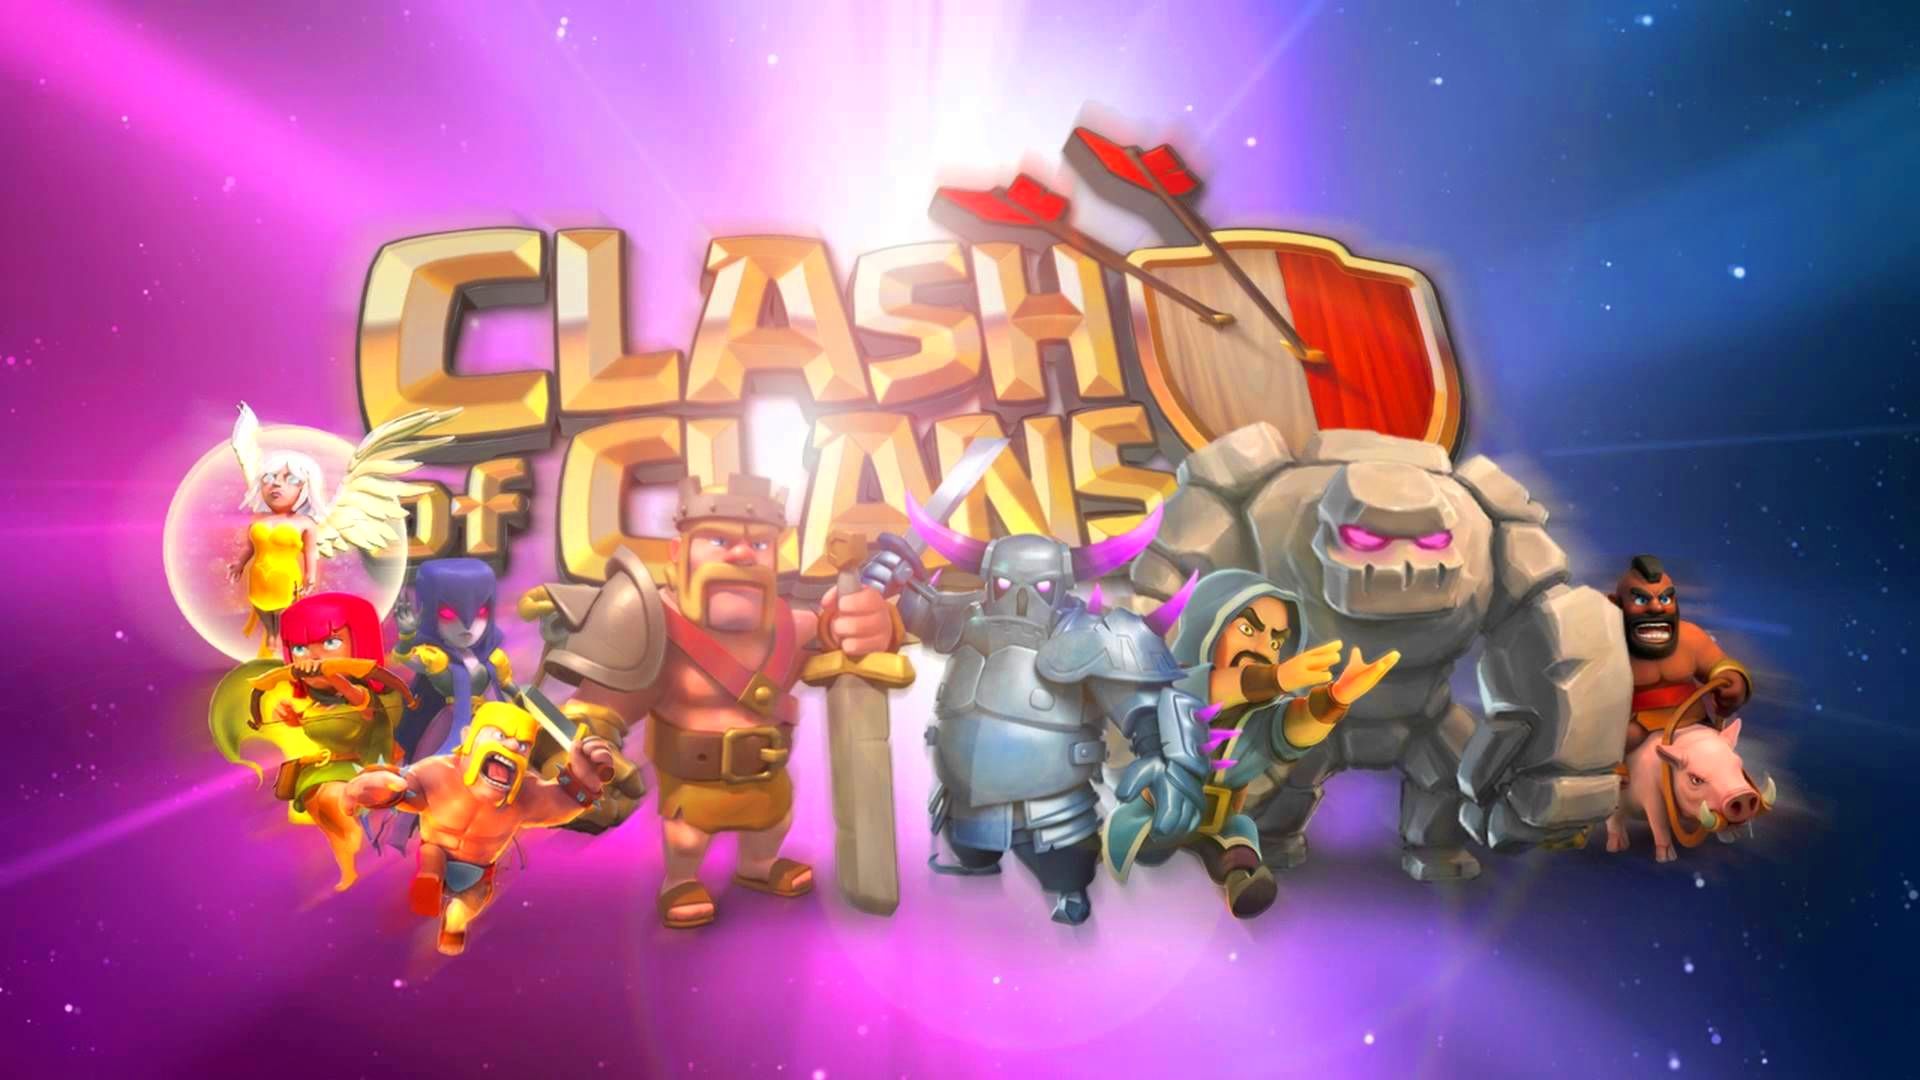 Clash of Clans Games Wallpaper